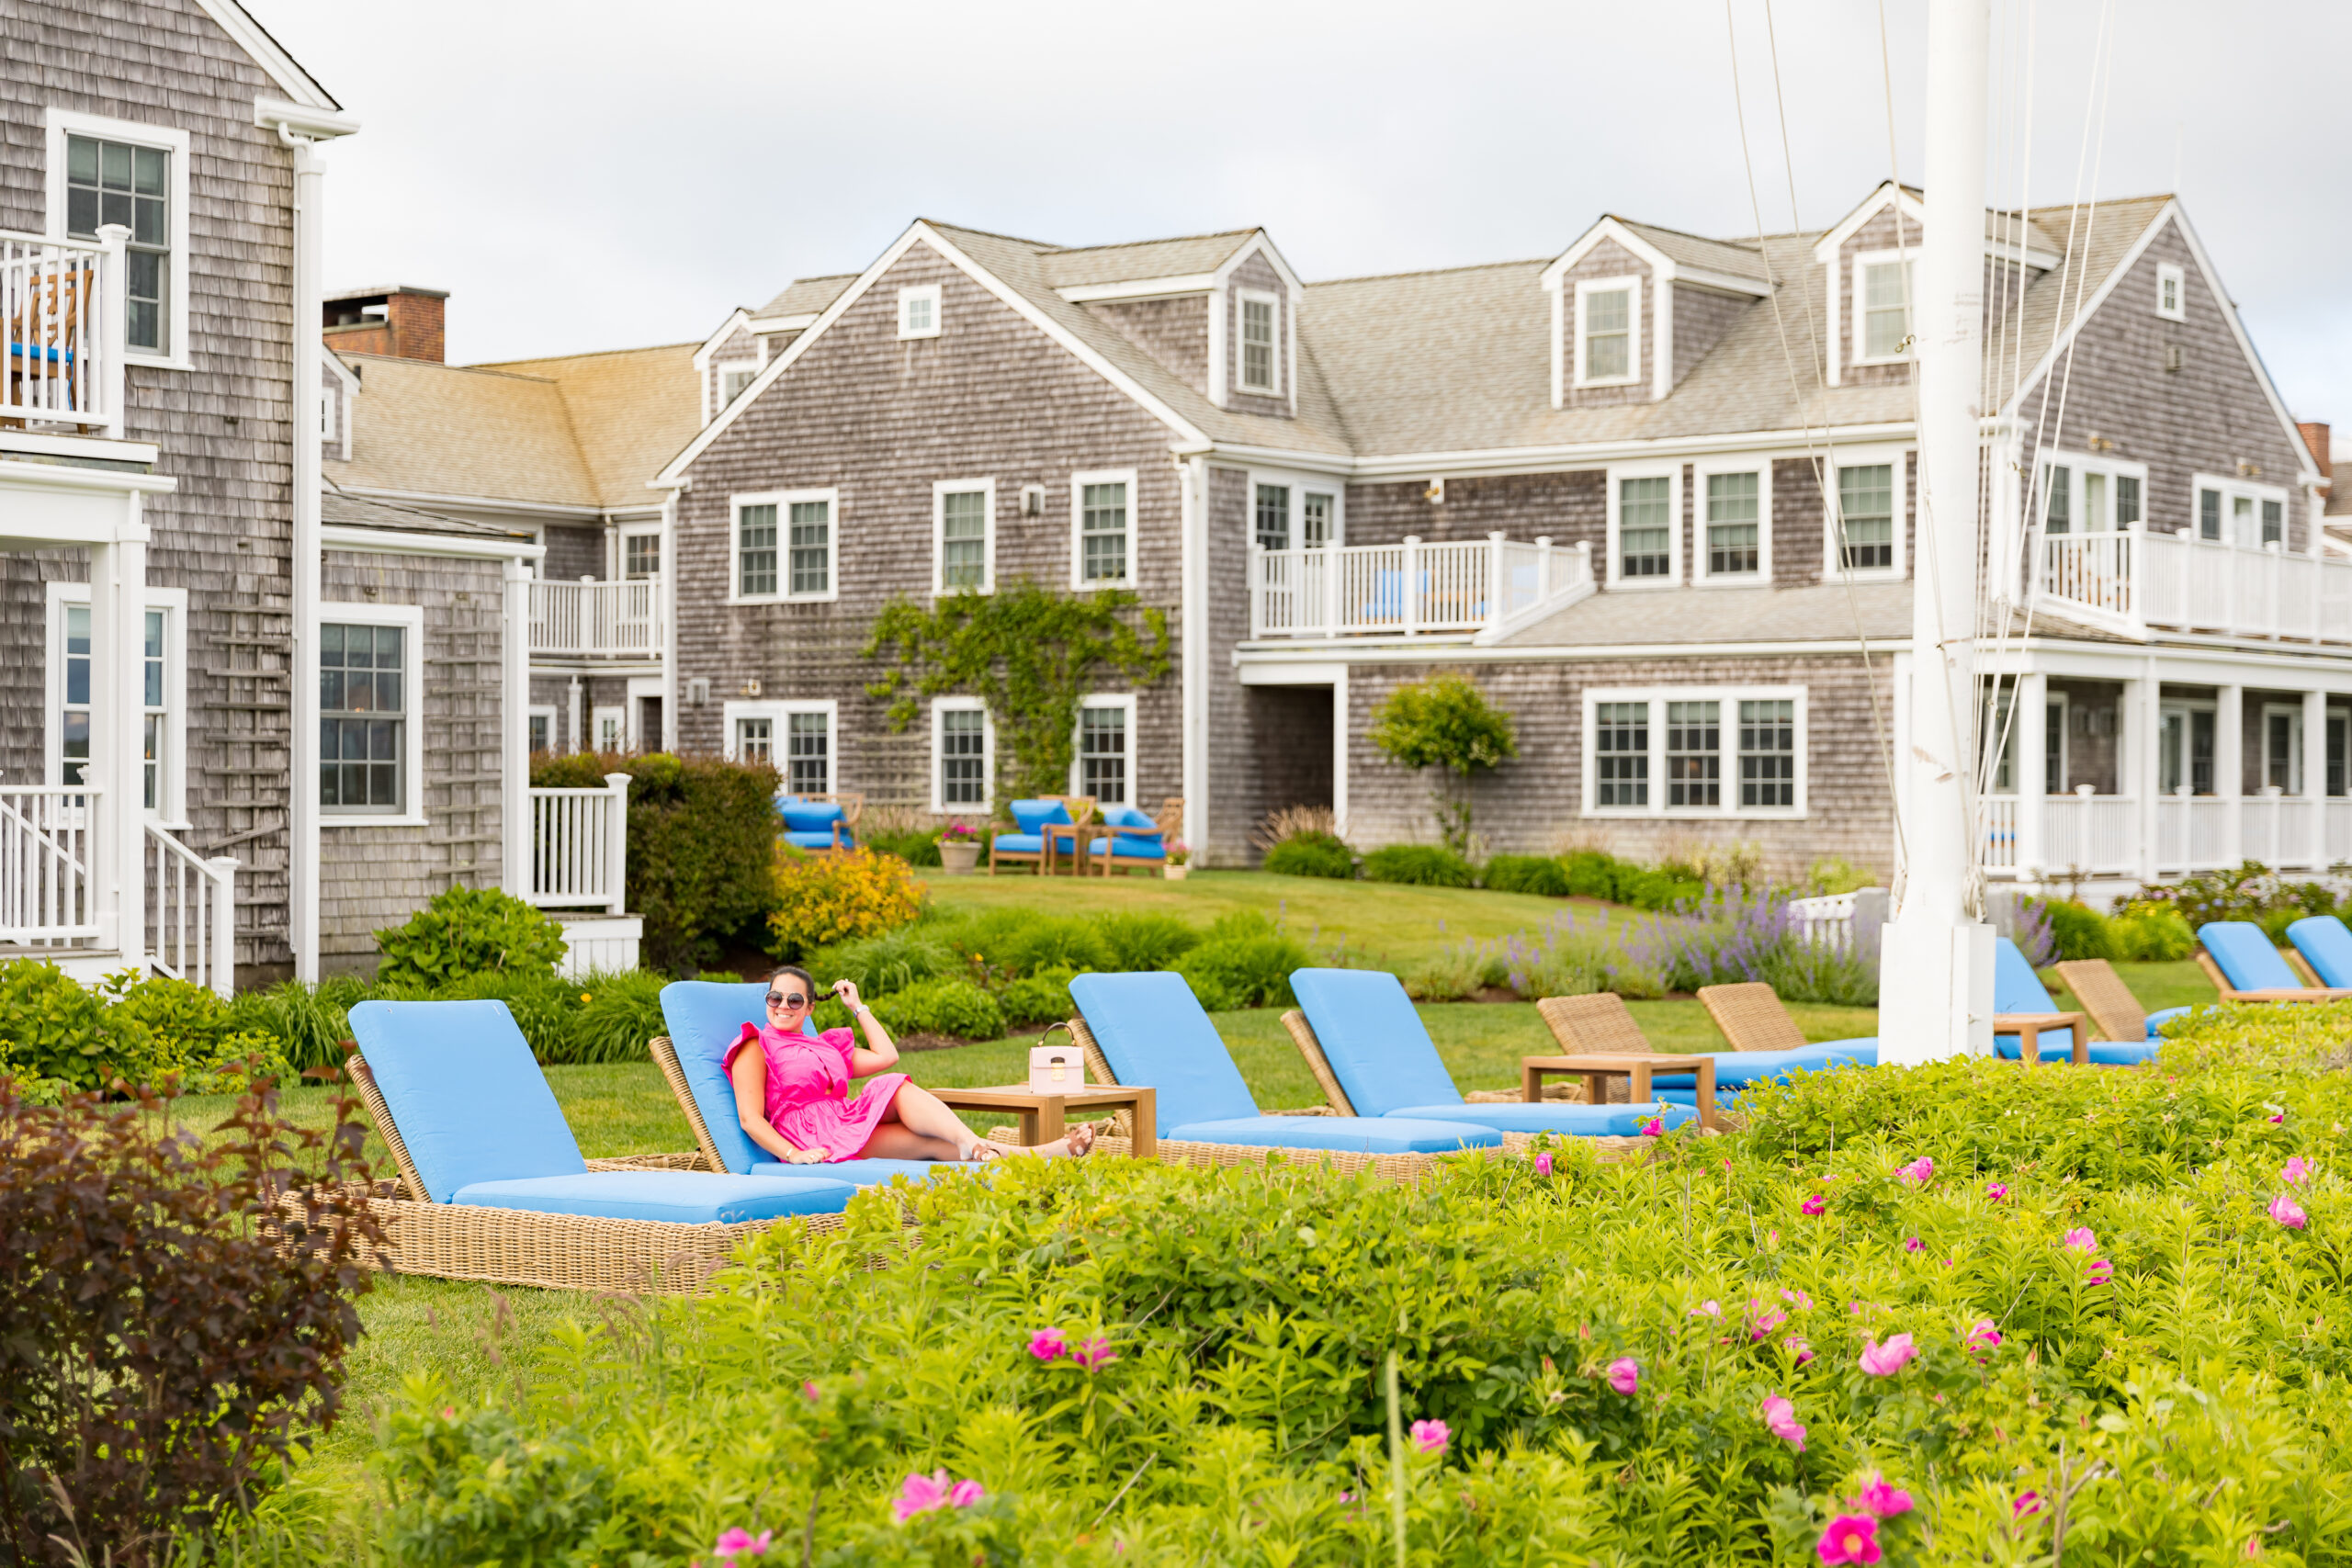 The White Elephant got a refresh this summer on Nantucket